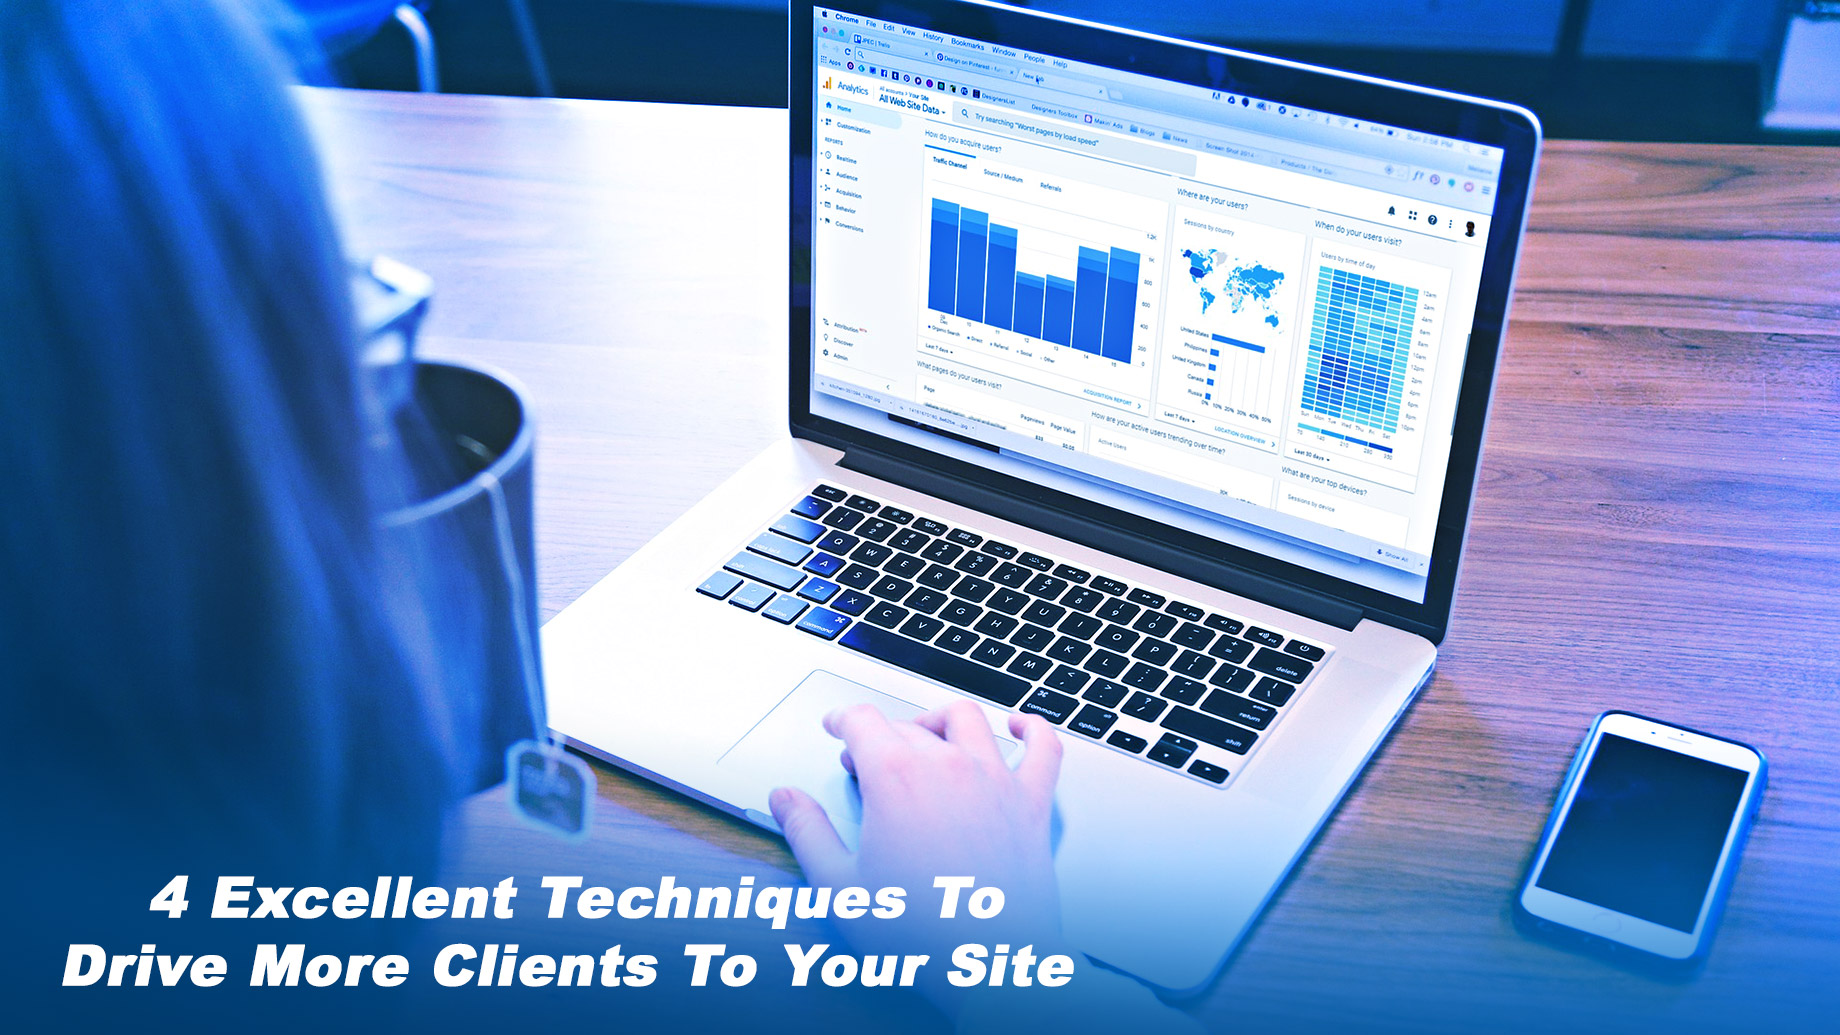 4 Excellent Techniques To Drive More Clients To Your Site